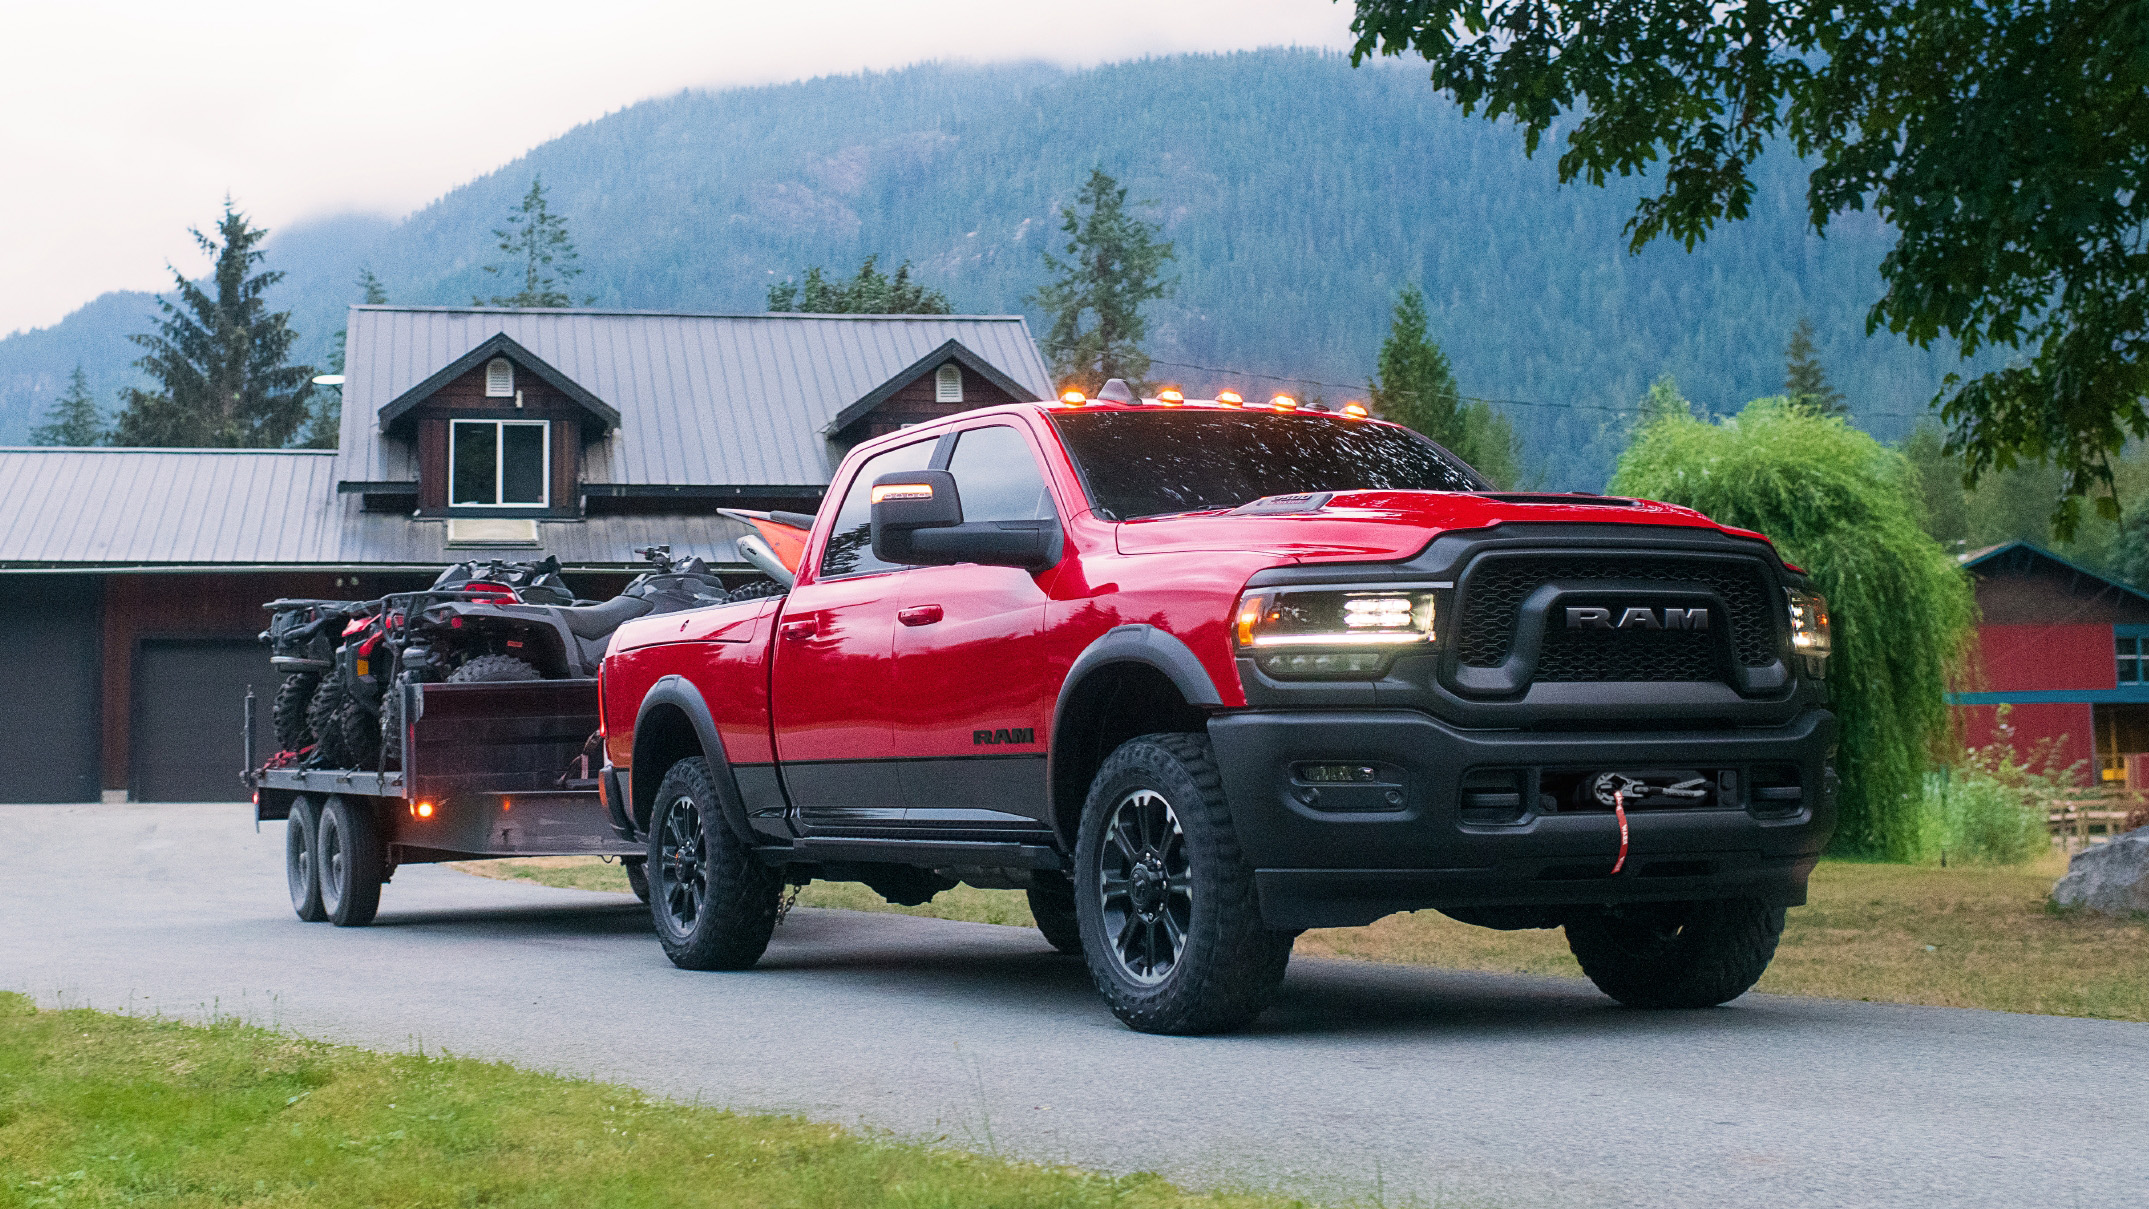 2023 Ram Rebel 2500 HD Adds The Diesel Engine You Can t Have In The 